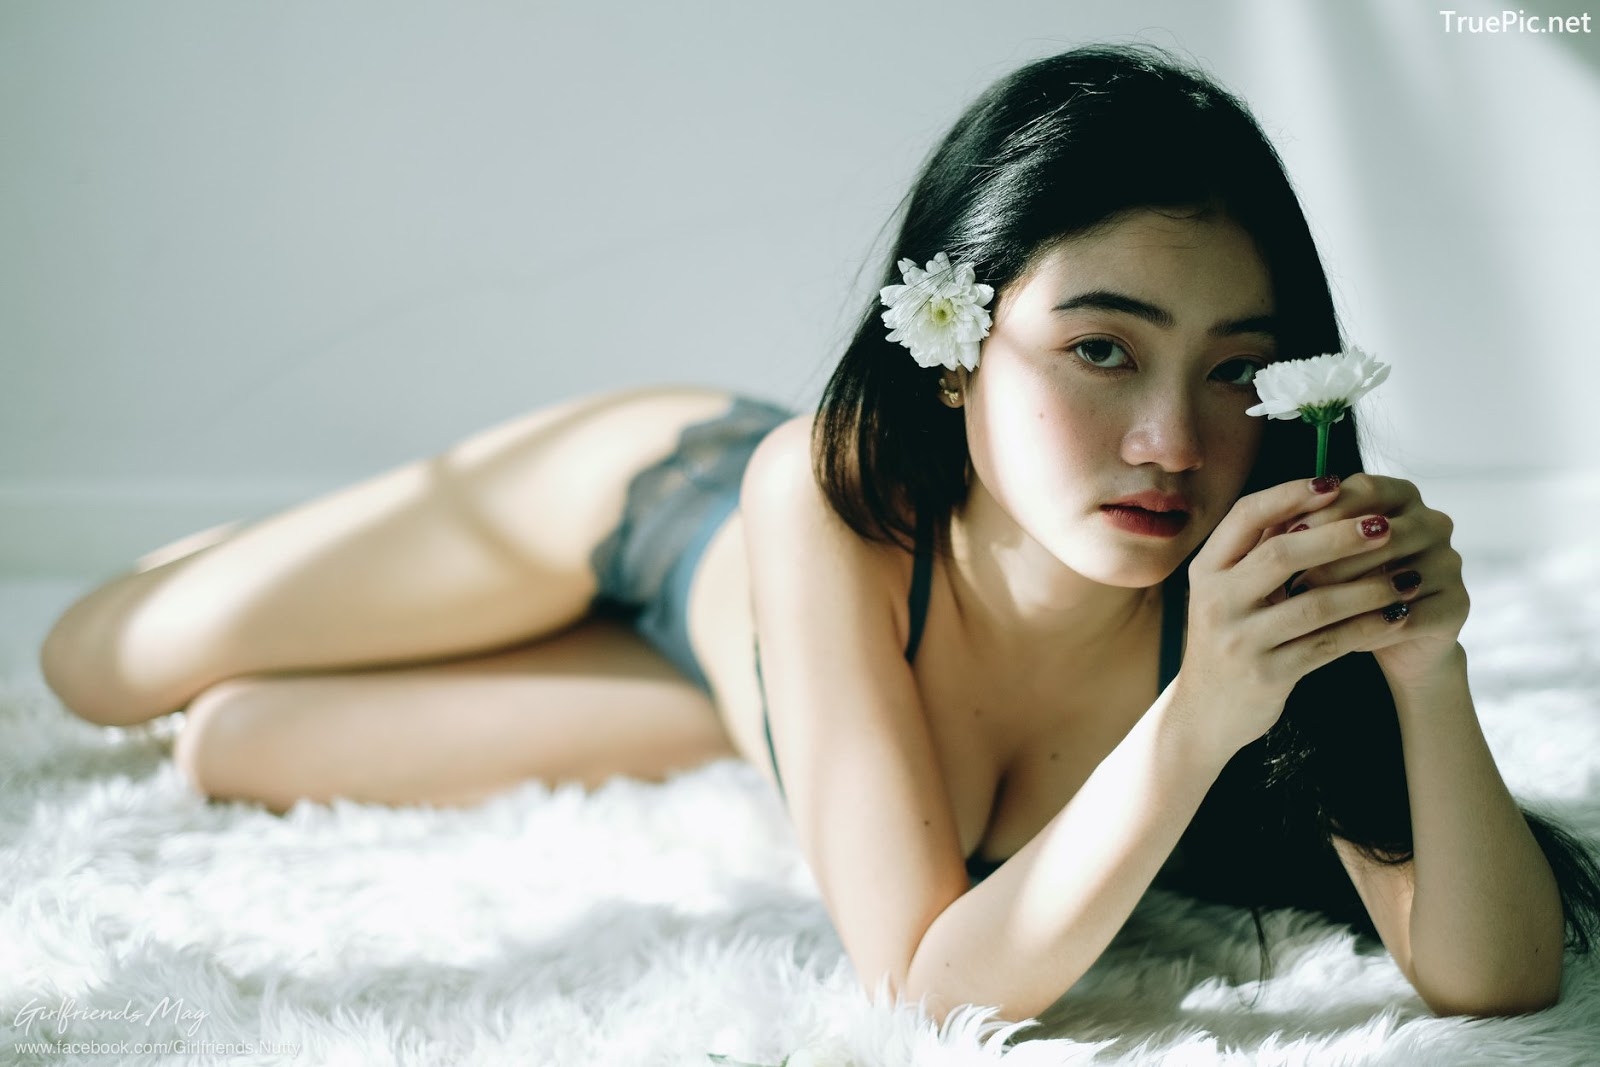 Image Thailand Model - Cholticha Intapuang - Flower In The Room - TruePic.net - Picture-1